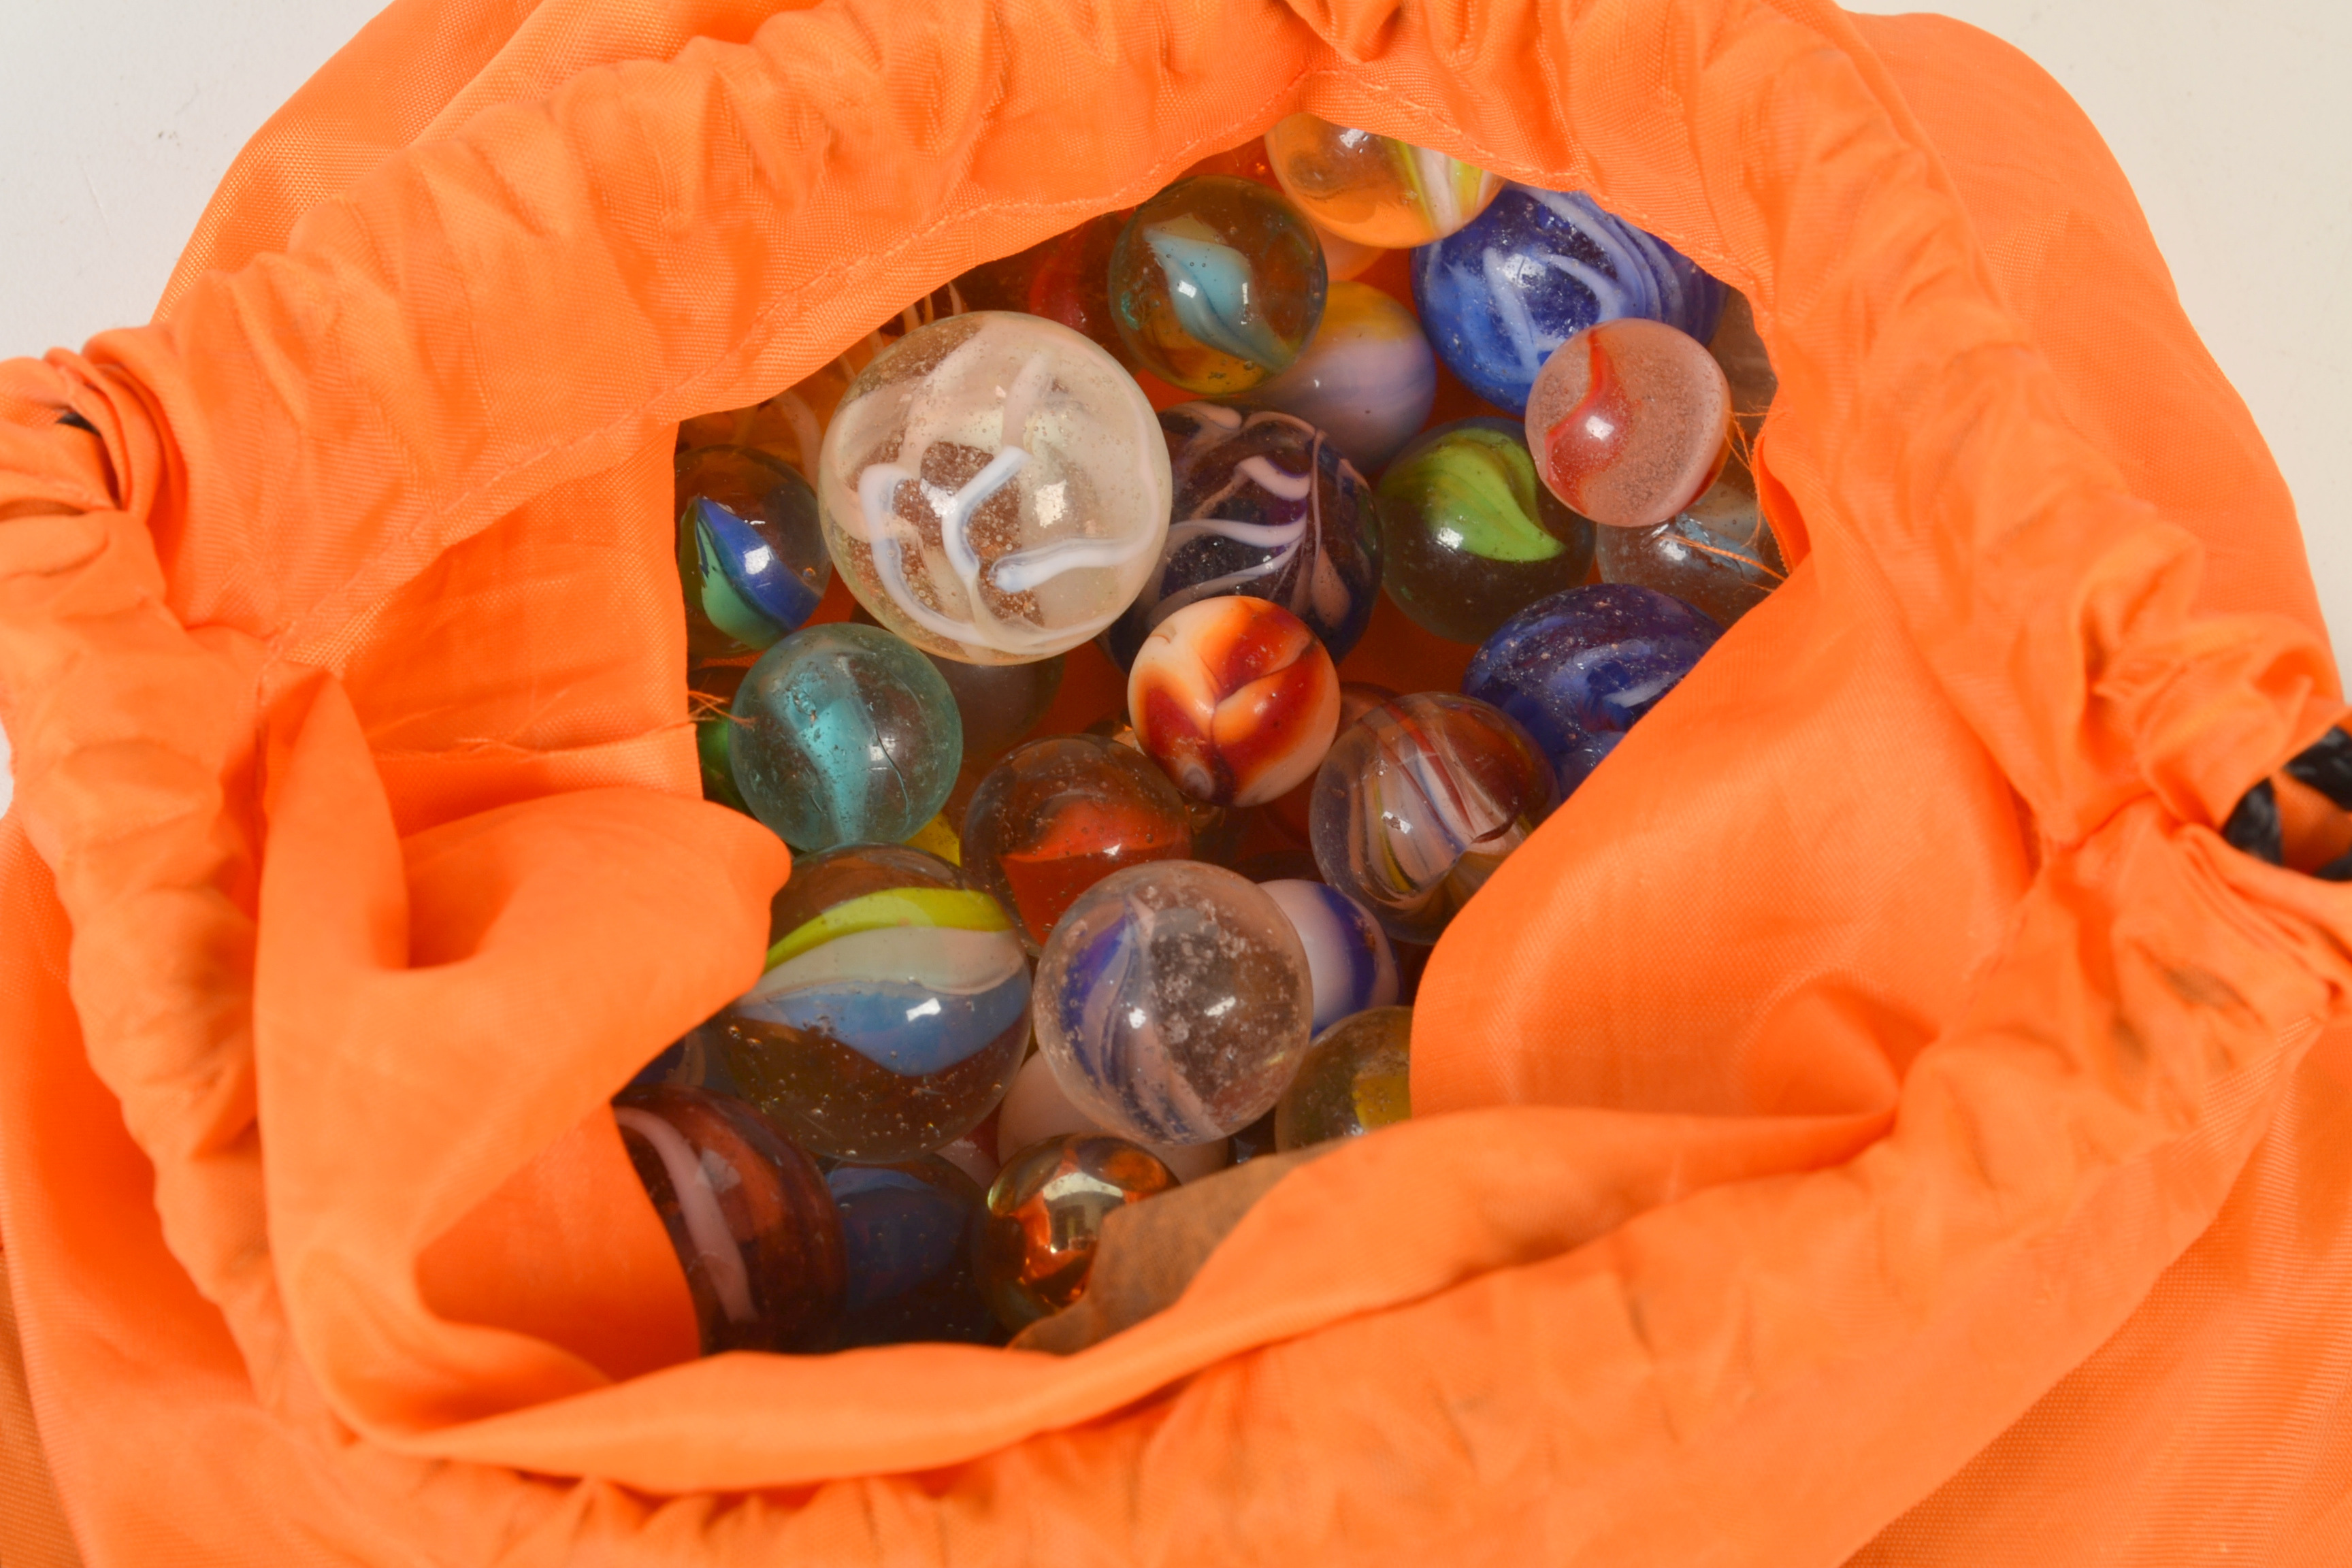 A bag of glass marbles.